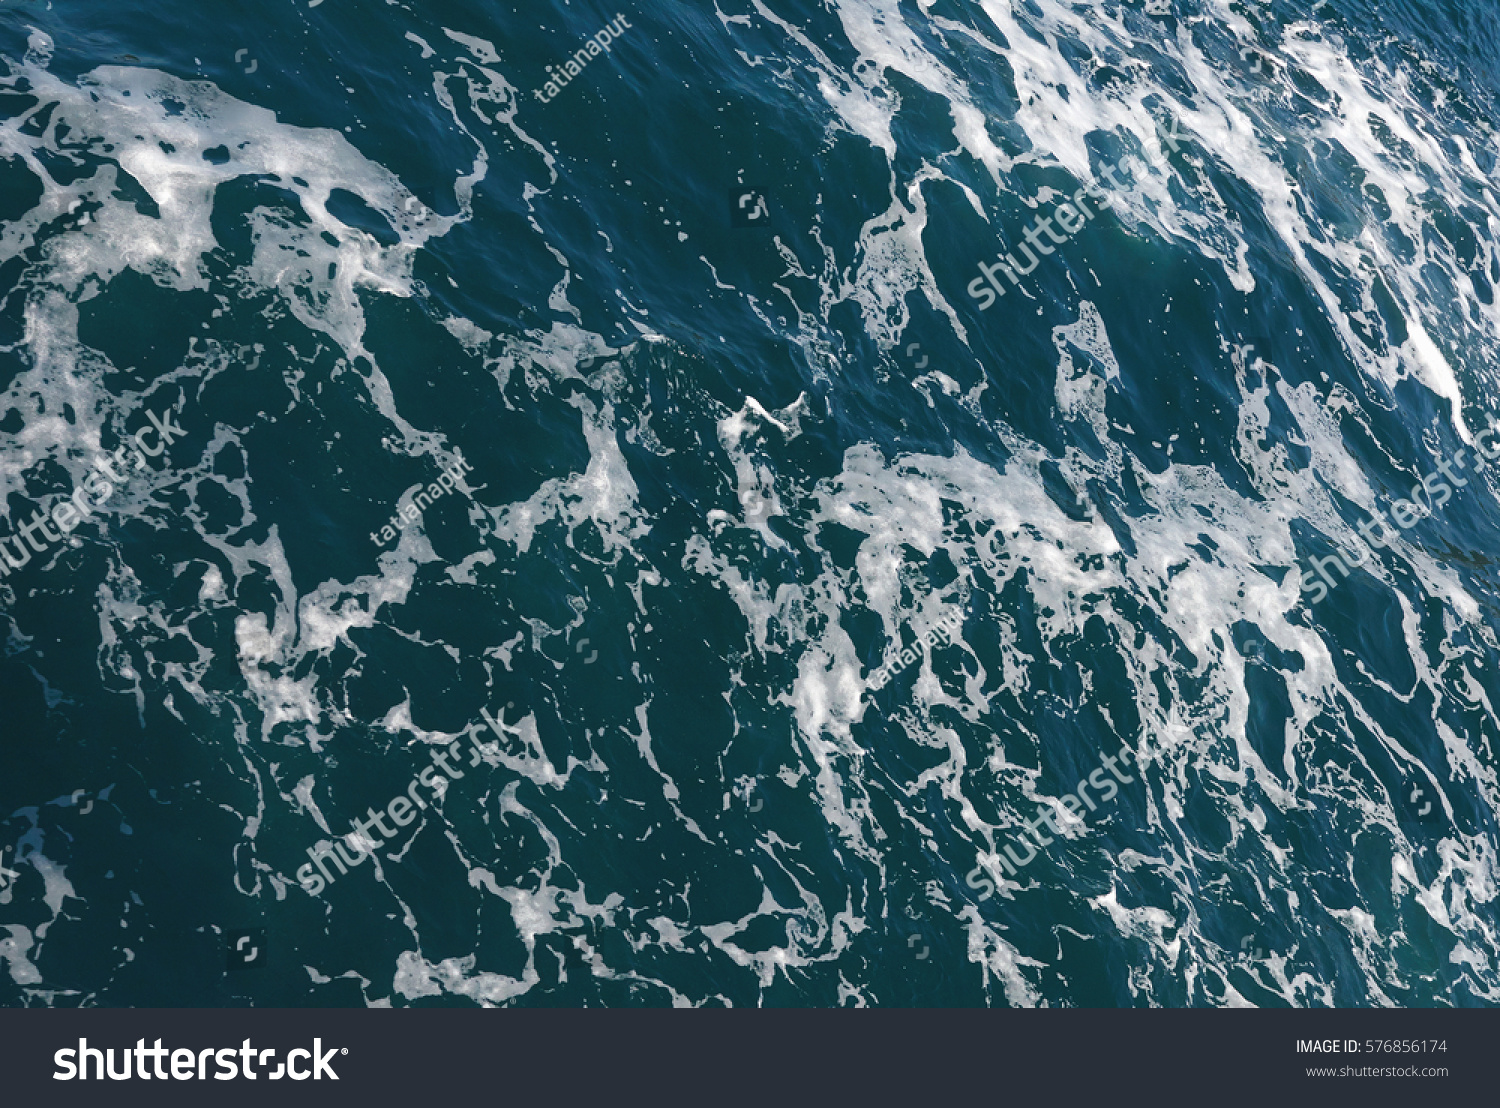 Sea water background. #576856174